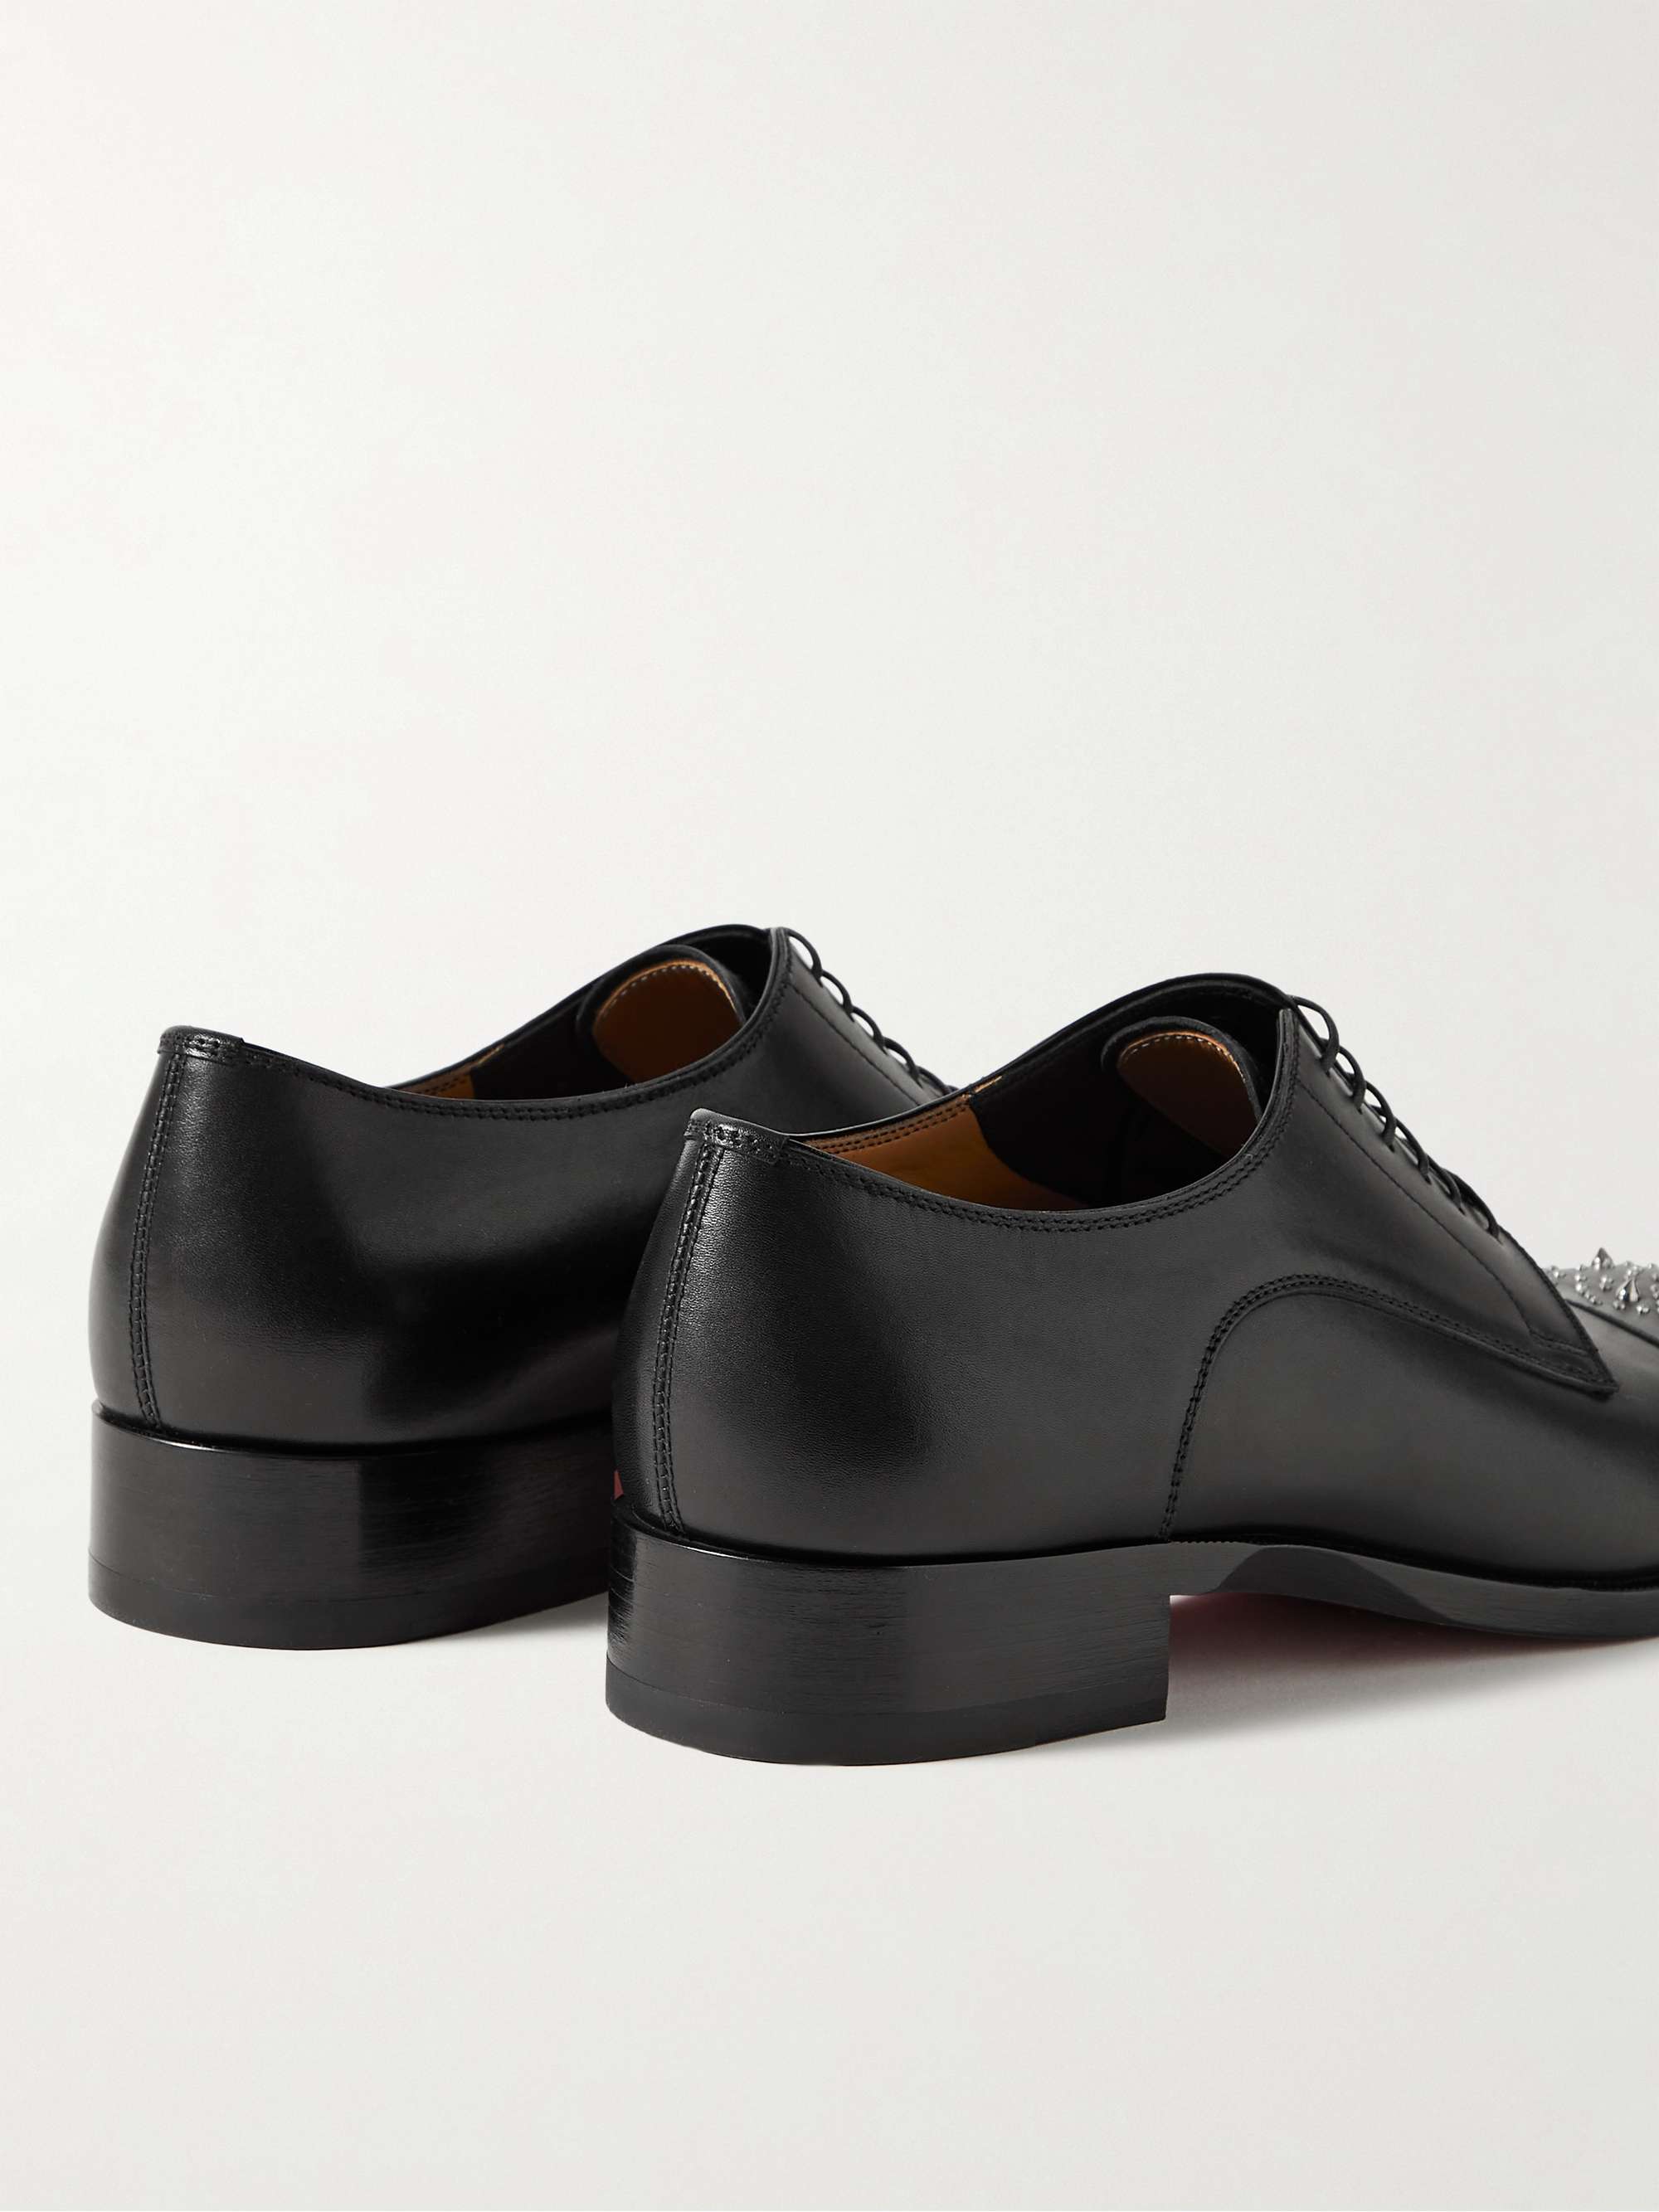 CHRISTIAN LOUBOUTIN Maltese Studded Leather Derby Shoes | MR PORTER